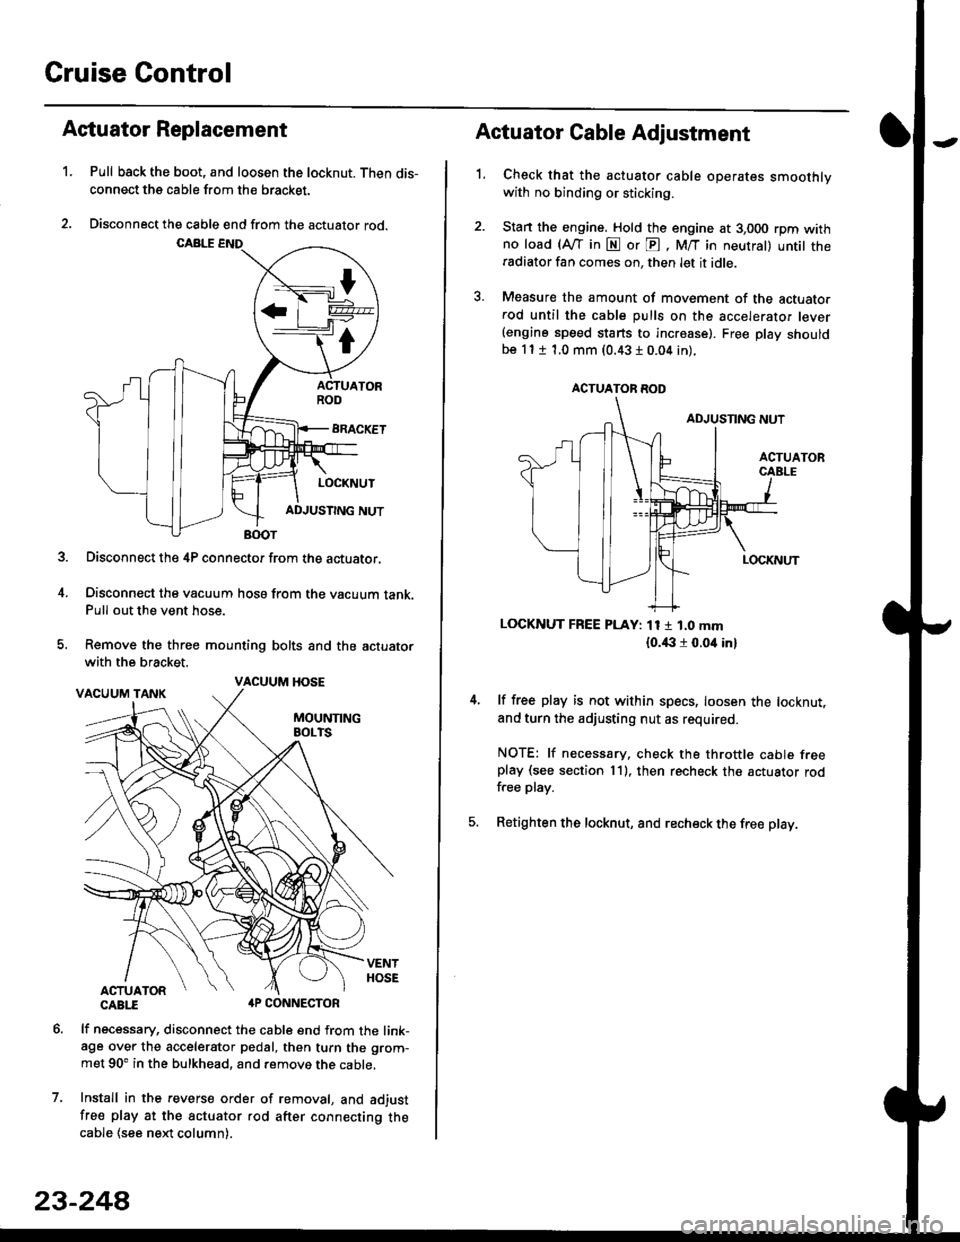 HONDA CIVIC 1996 6.G Manual PDF Cruise Control
t
D=
t
Astuator Replacement
1.Pull back the boot, and loosen the locknut. Then dis-
connect the cable from the bracket.
Disconnect the cable end from the actuator rod.
Disconnect the 4P